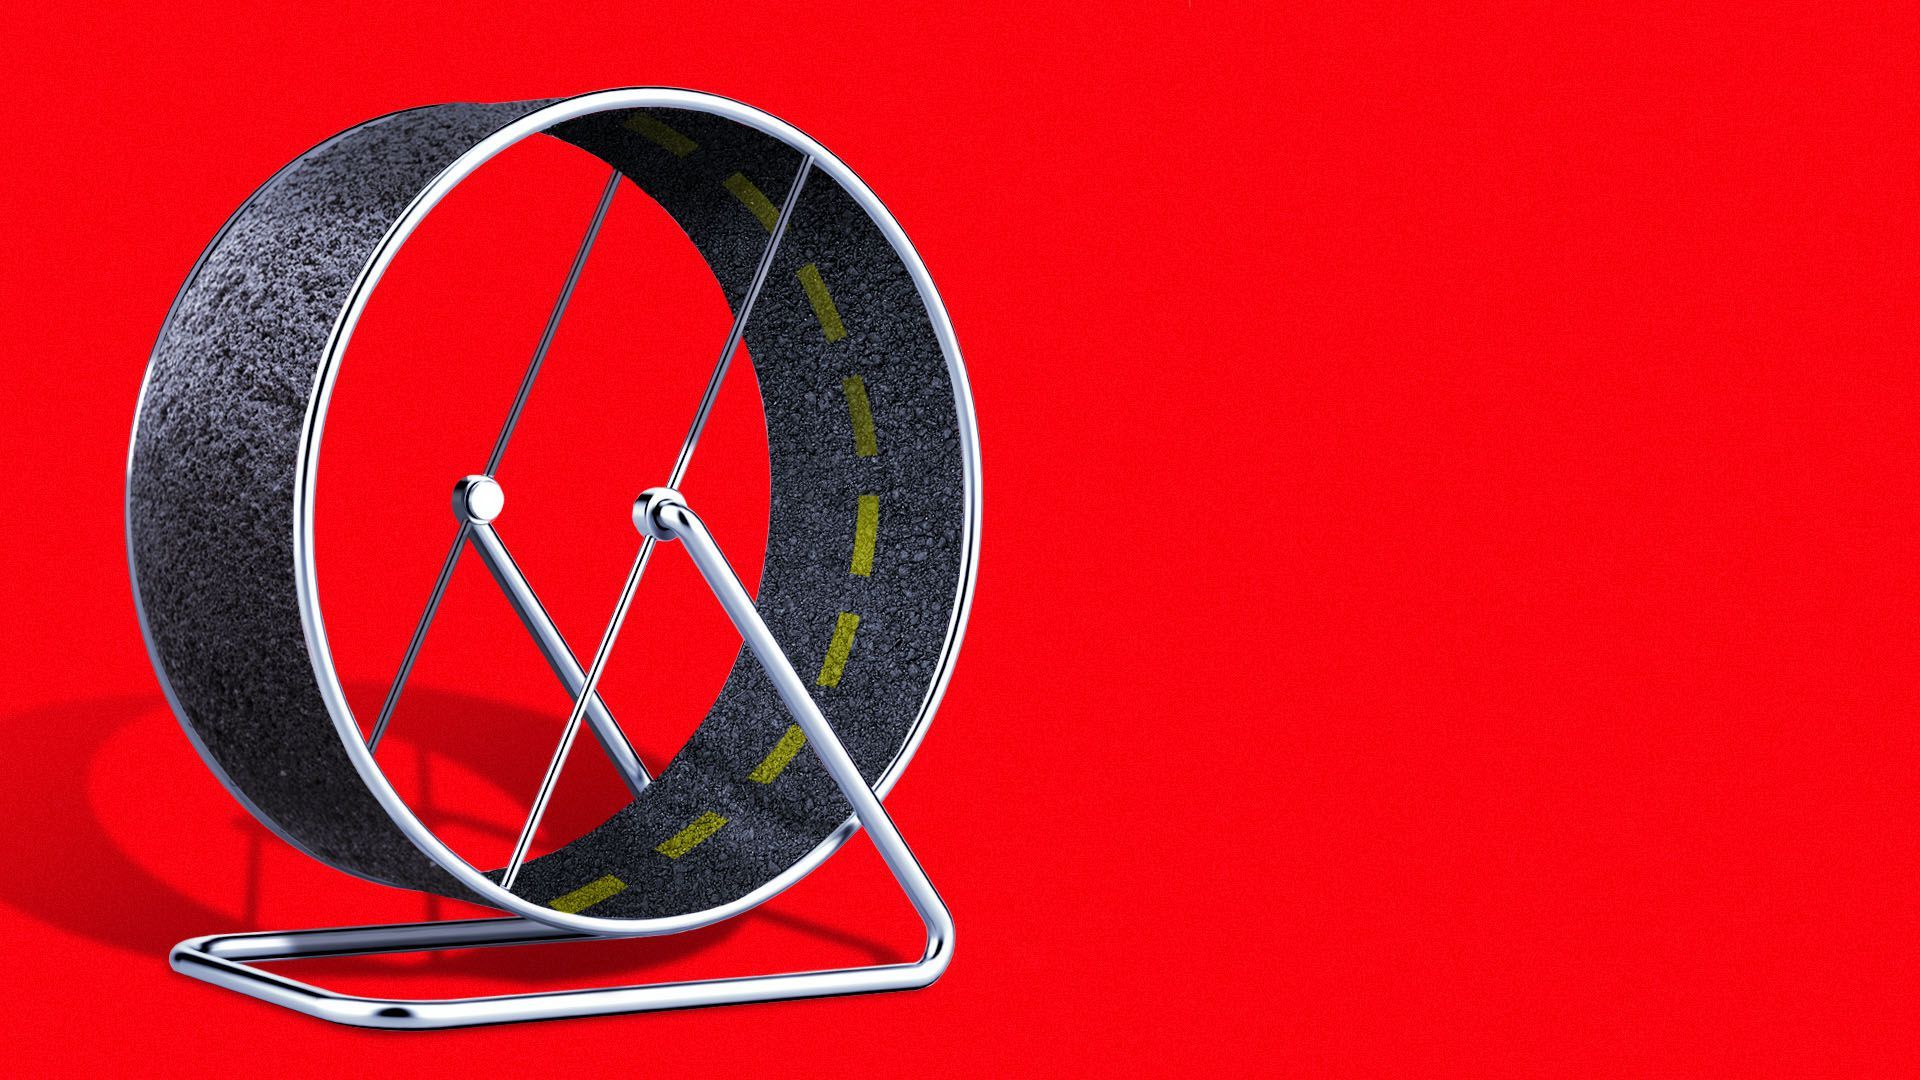 Illustration of a hamster wheel with a road on it